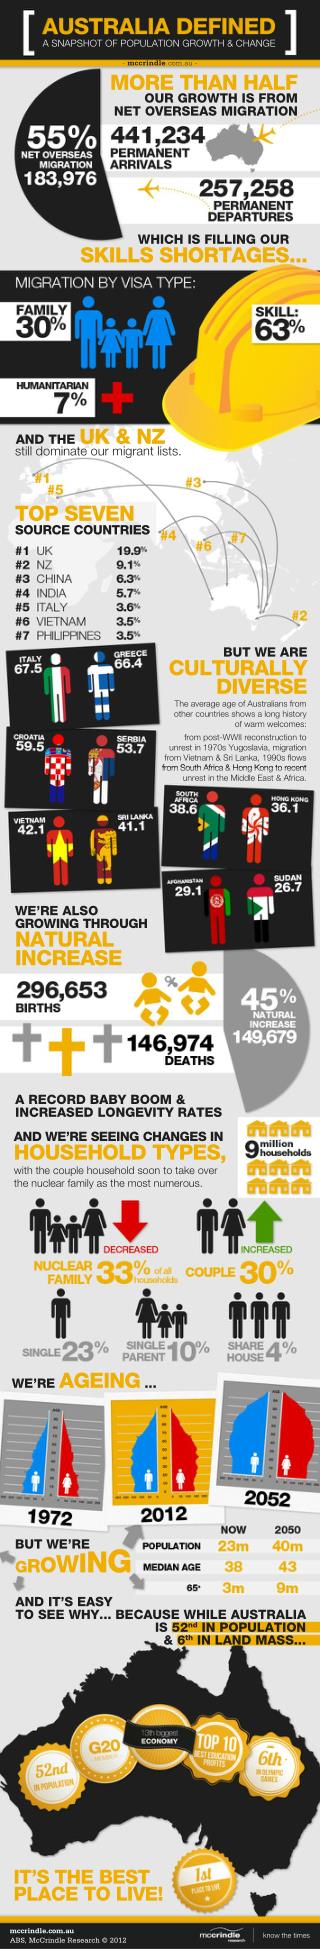 Australia defined-snapshot-of-population-growth-change mccrindle-research_infographic